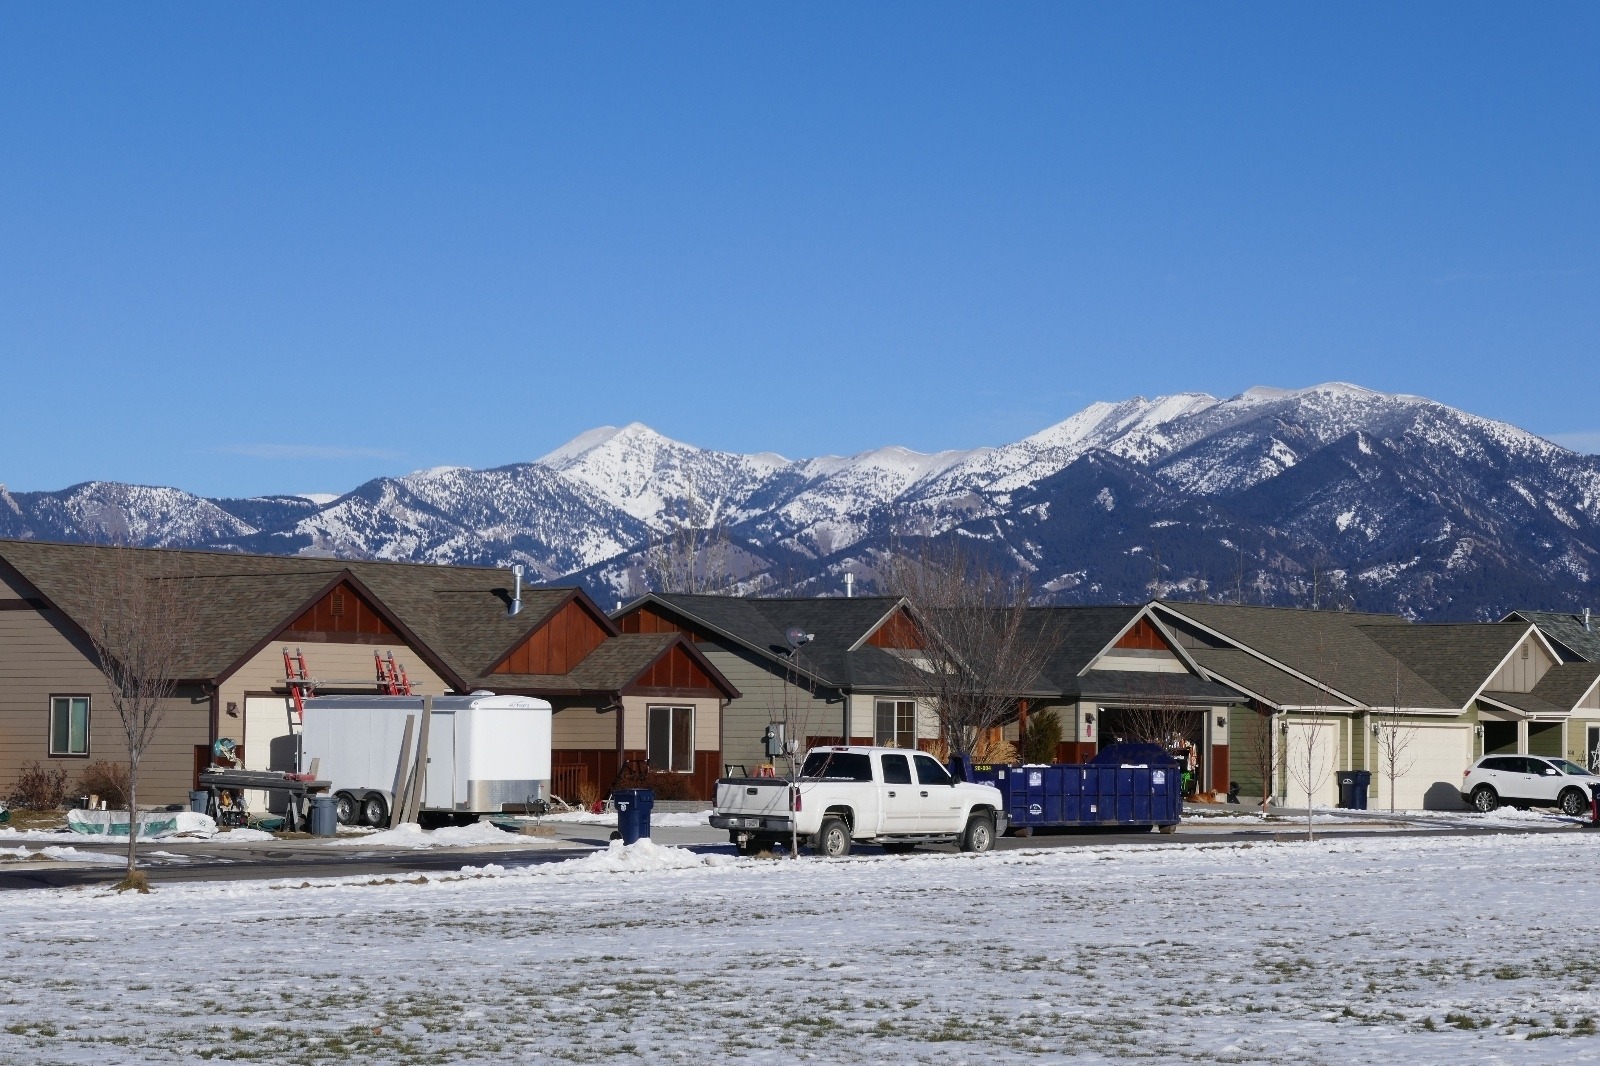 Crawford wonders: &quot;When Bozeman and the Gallatin Valley grow up, what do they want to be?&quot;  Photograph by Tim Crawford